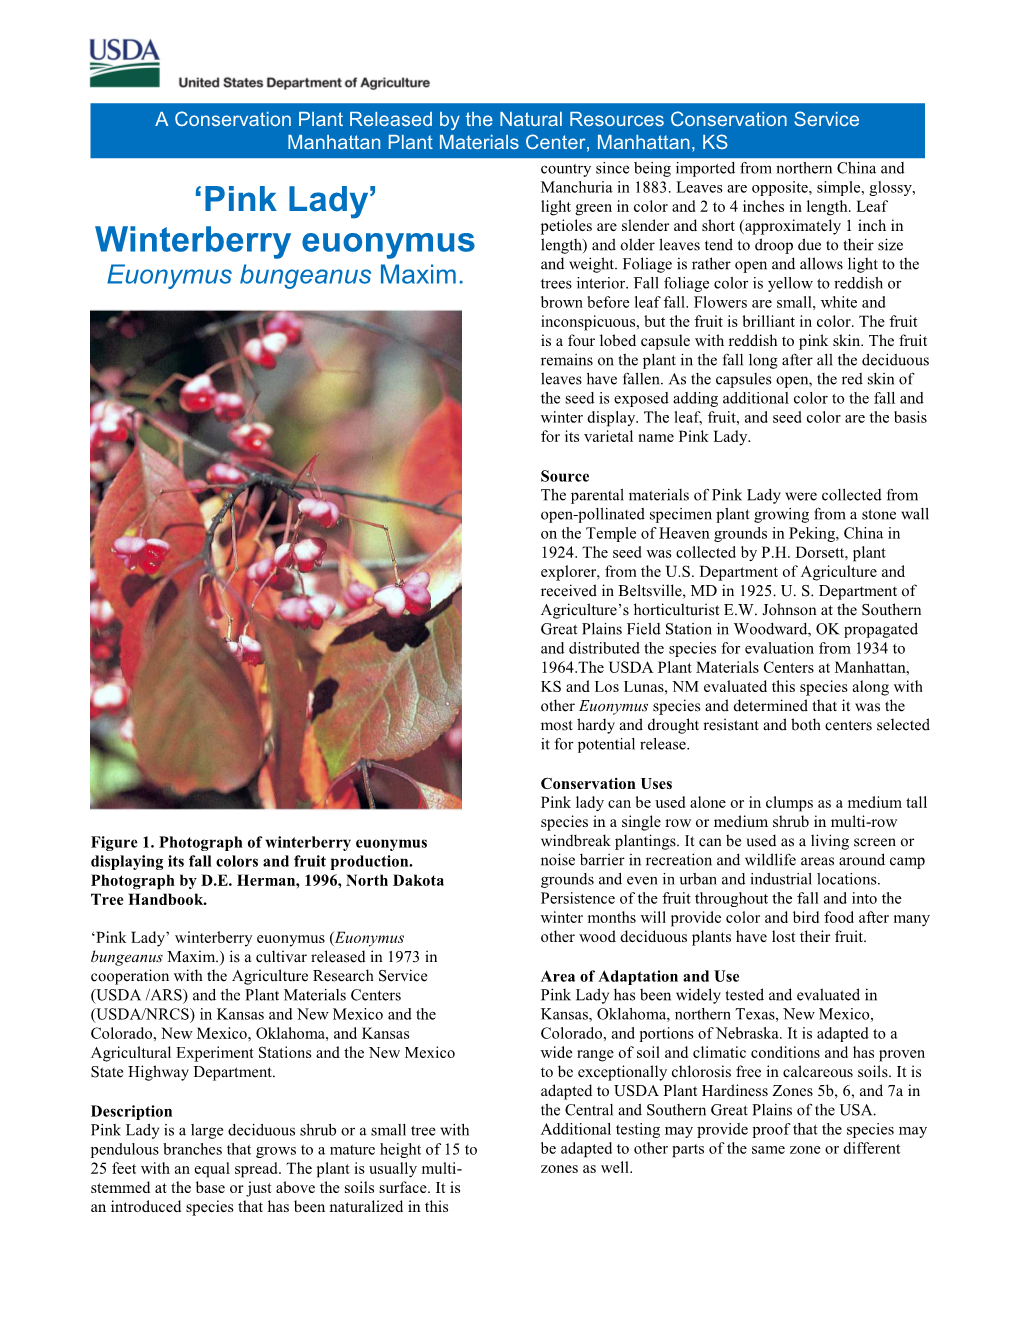 Release Brochure for 'Pink Lady' Winterberry Euonymus